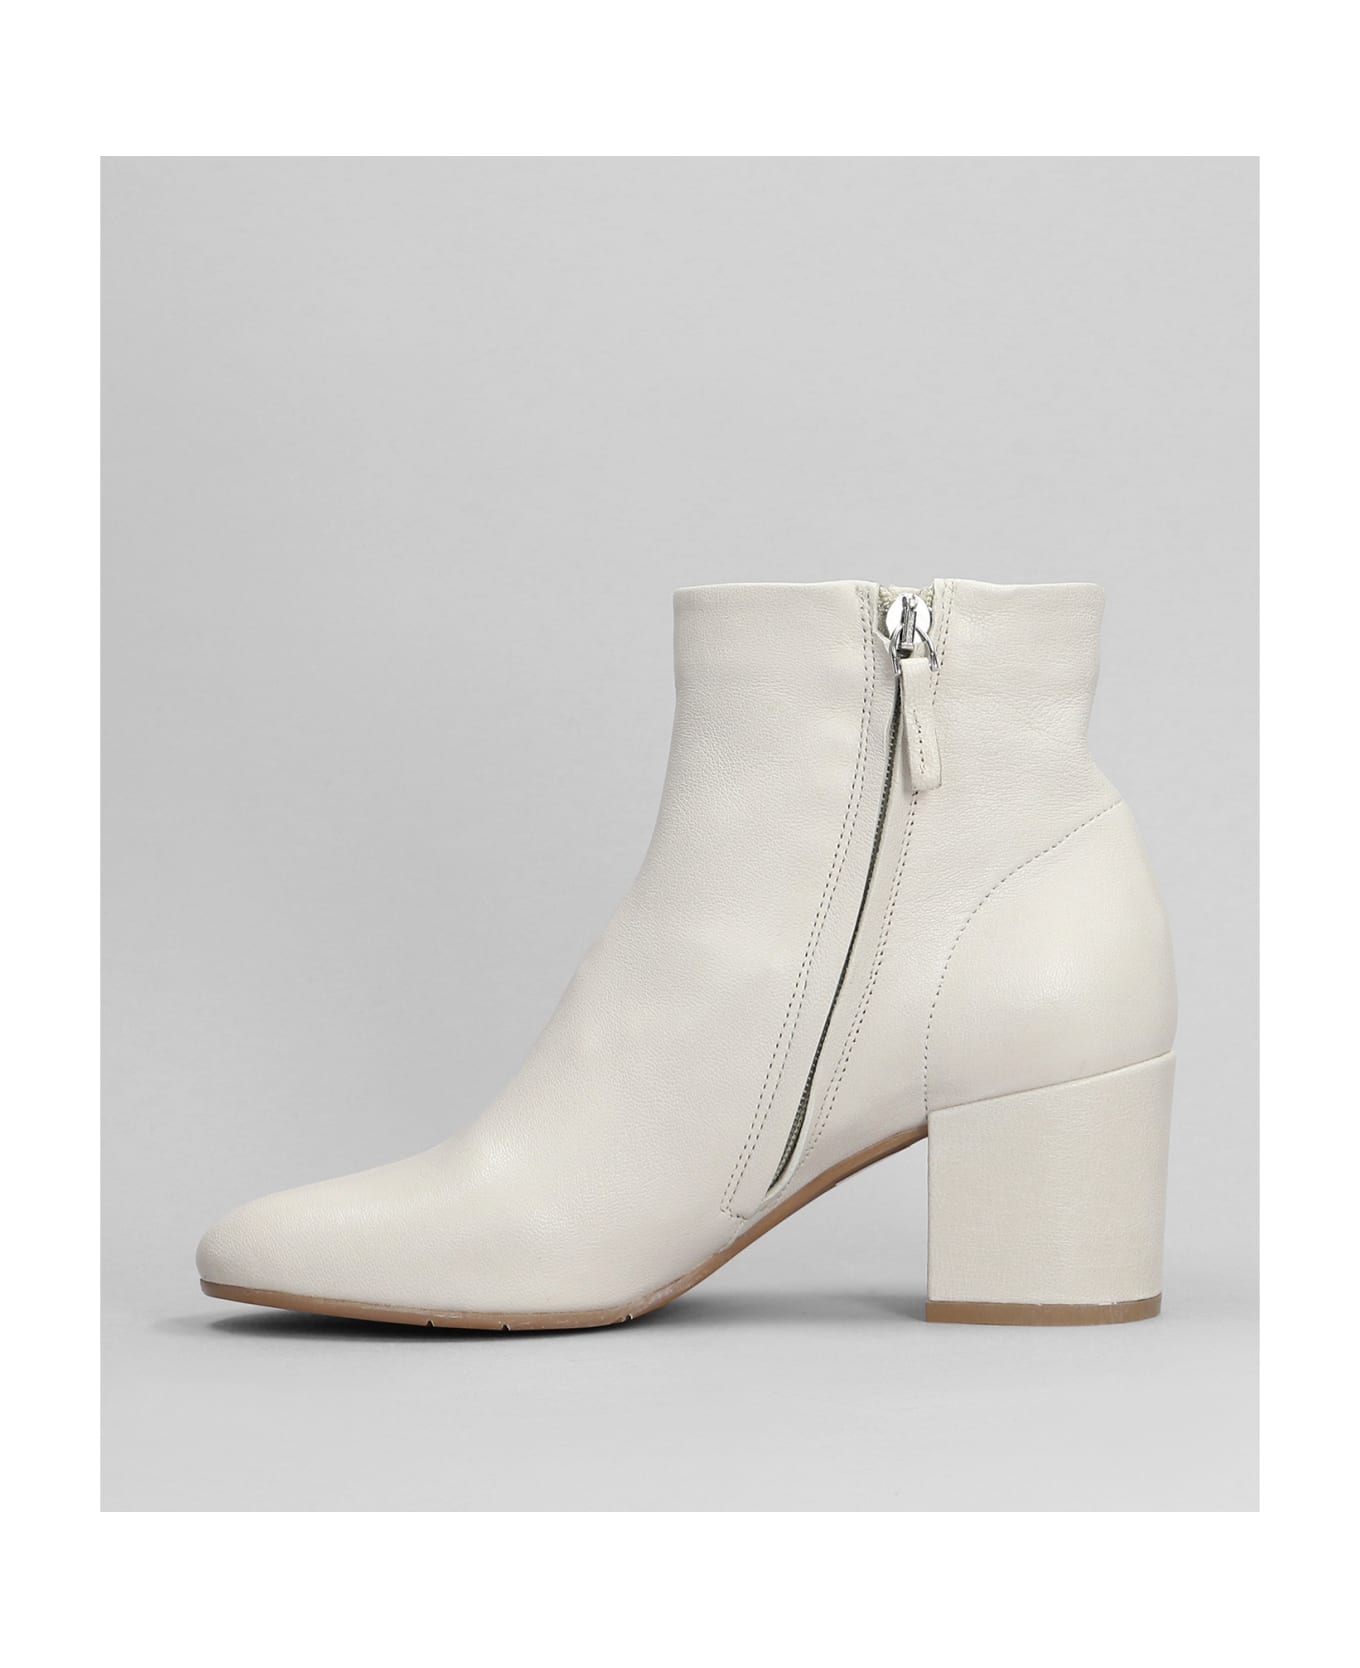 Julie Dee High Heels Ankle Boots In White Leather - white